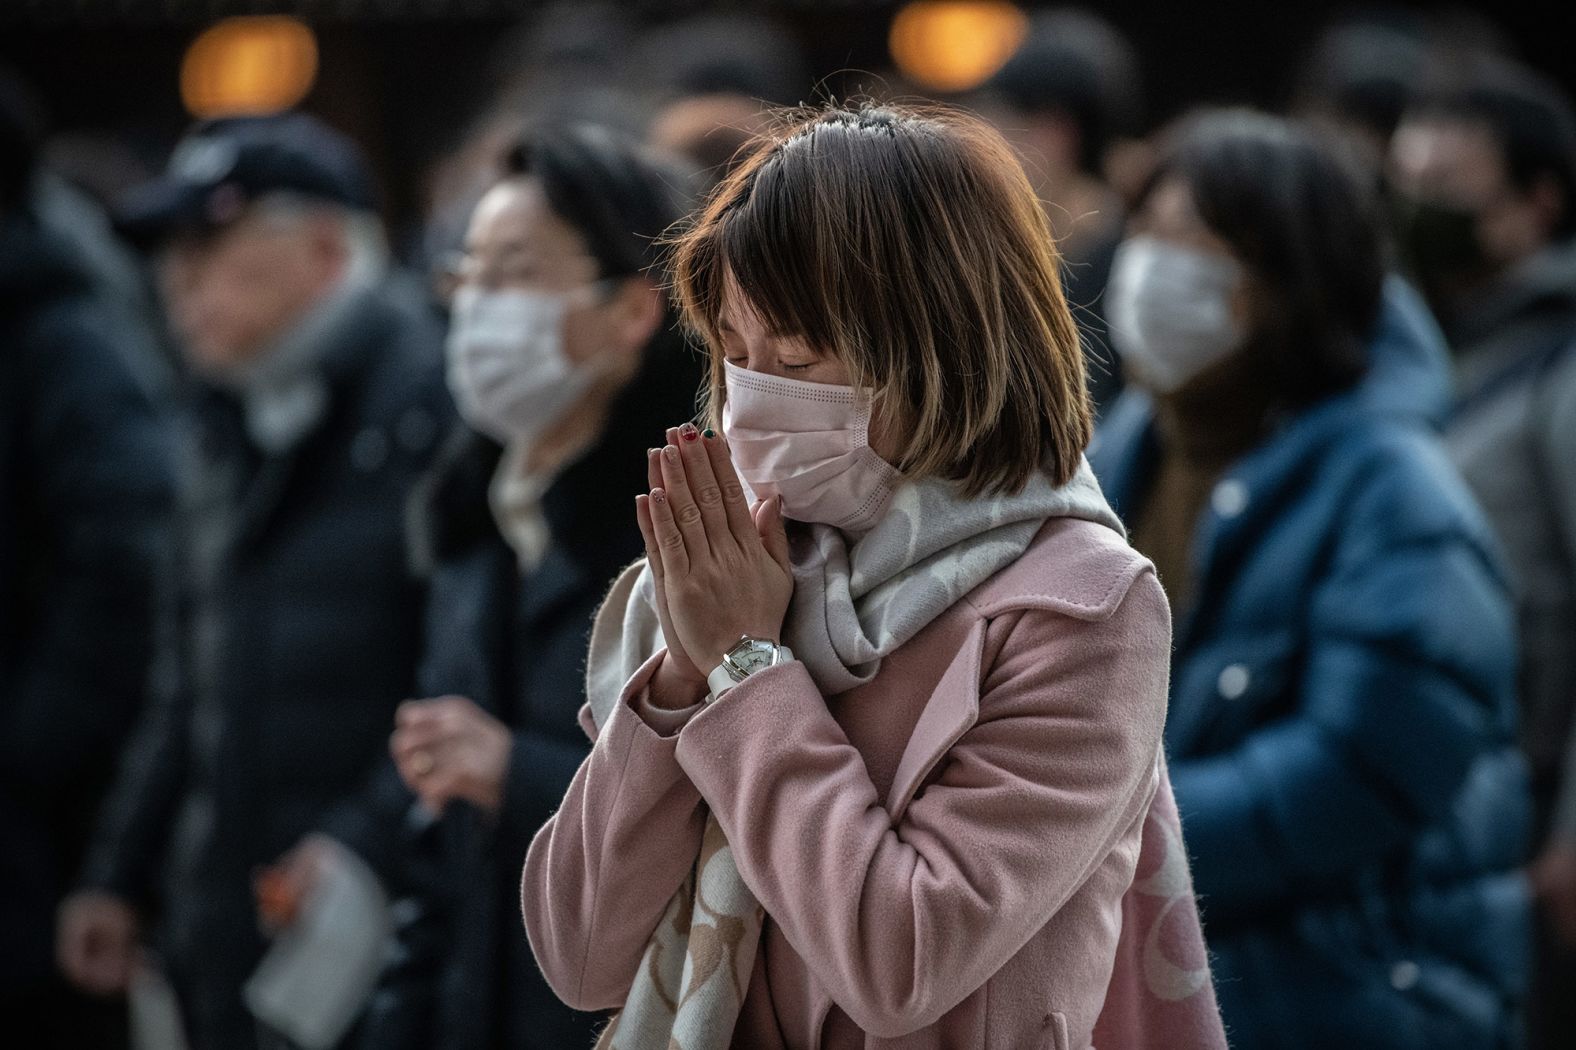 People pray for the new year at the Meiji Shrine in Tokyo.